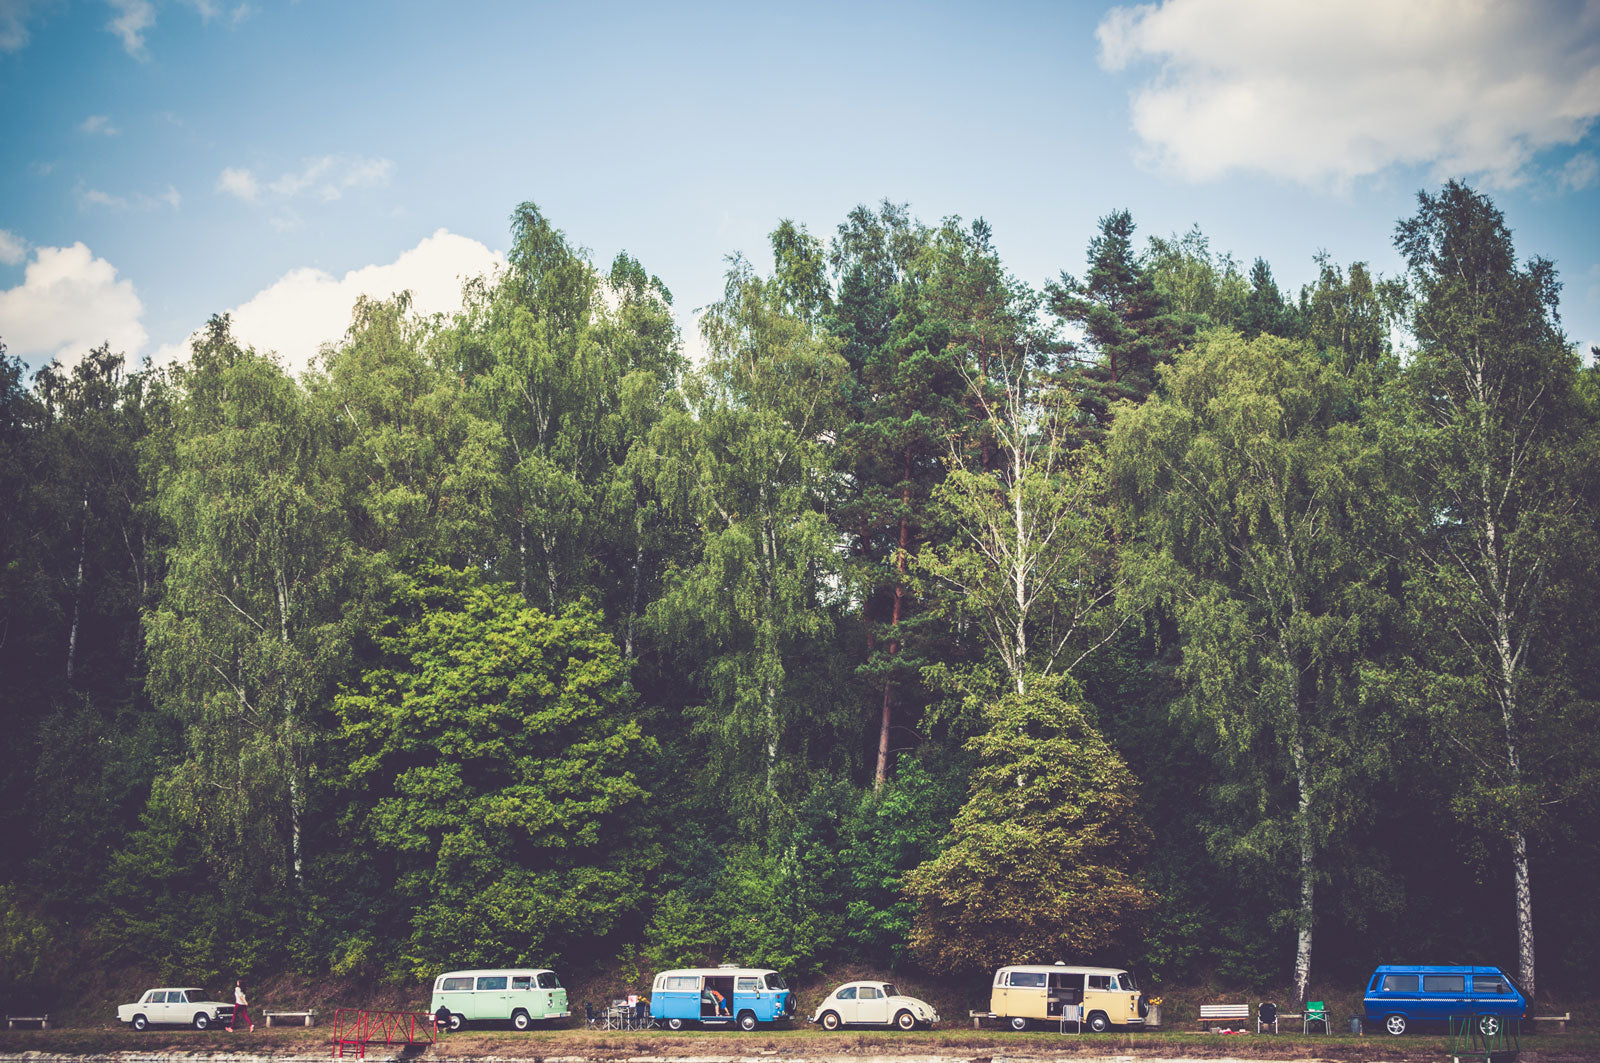 The Van Life Community Means Wherever You Park You'll Have Friends!